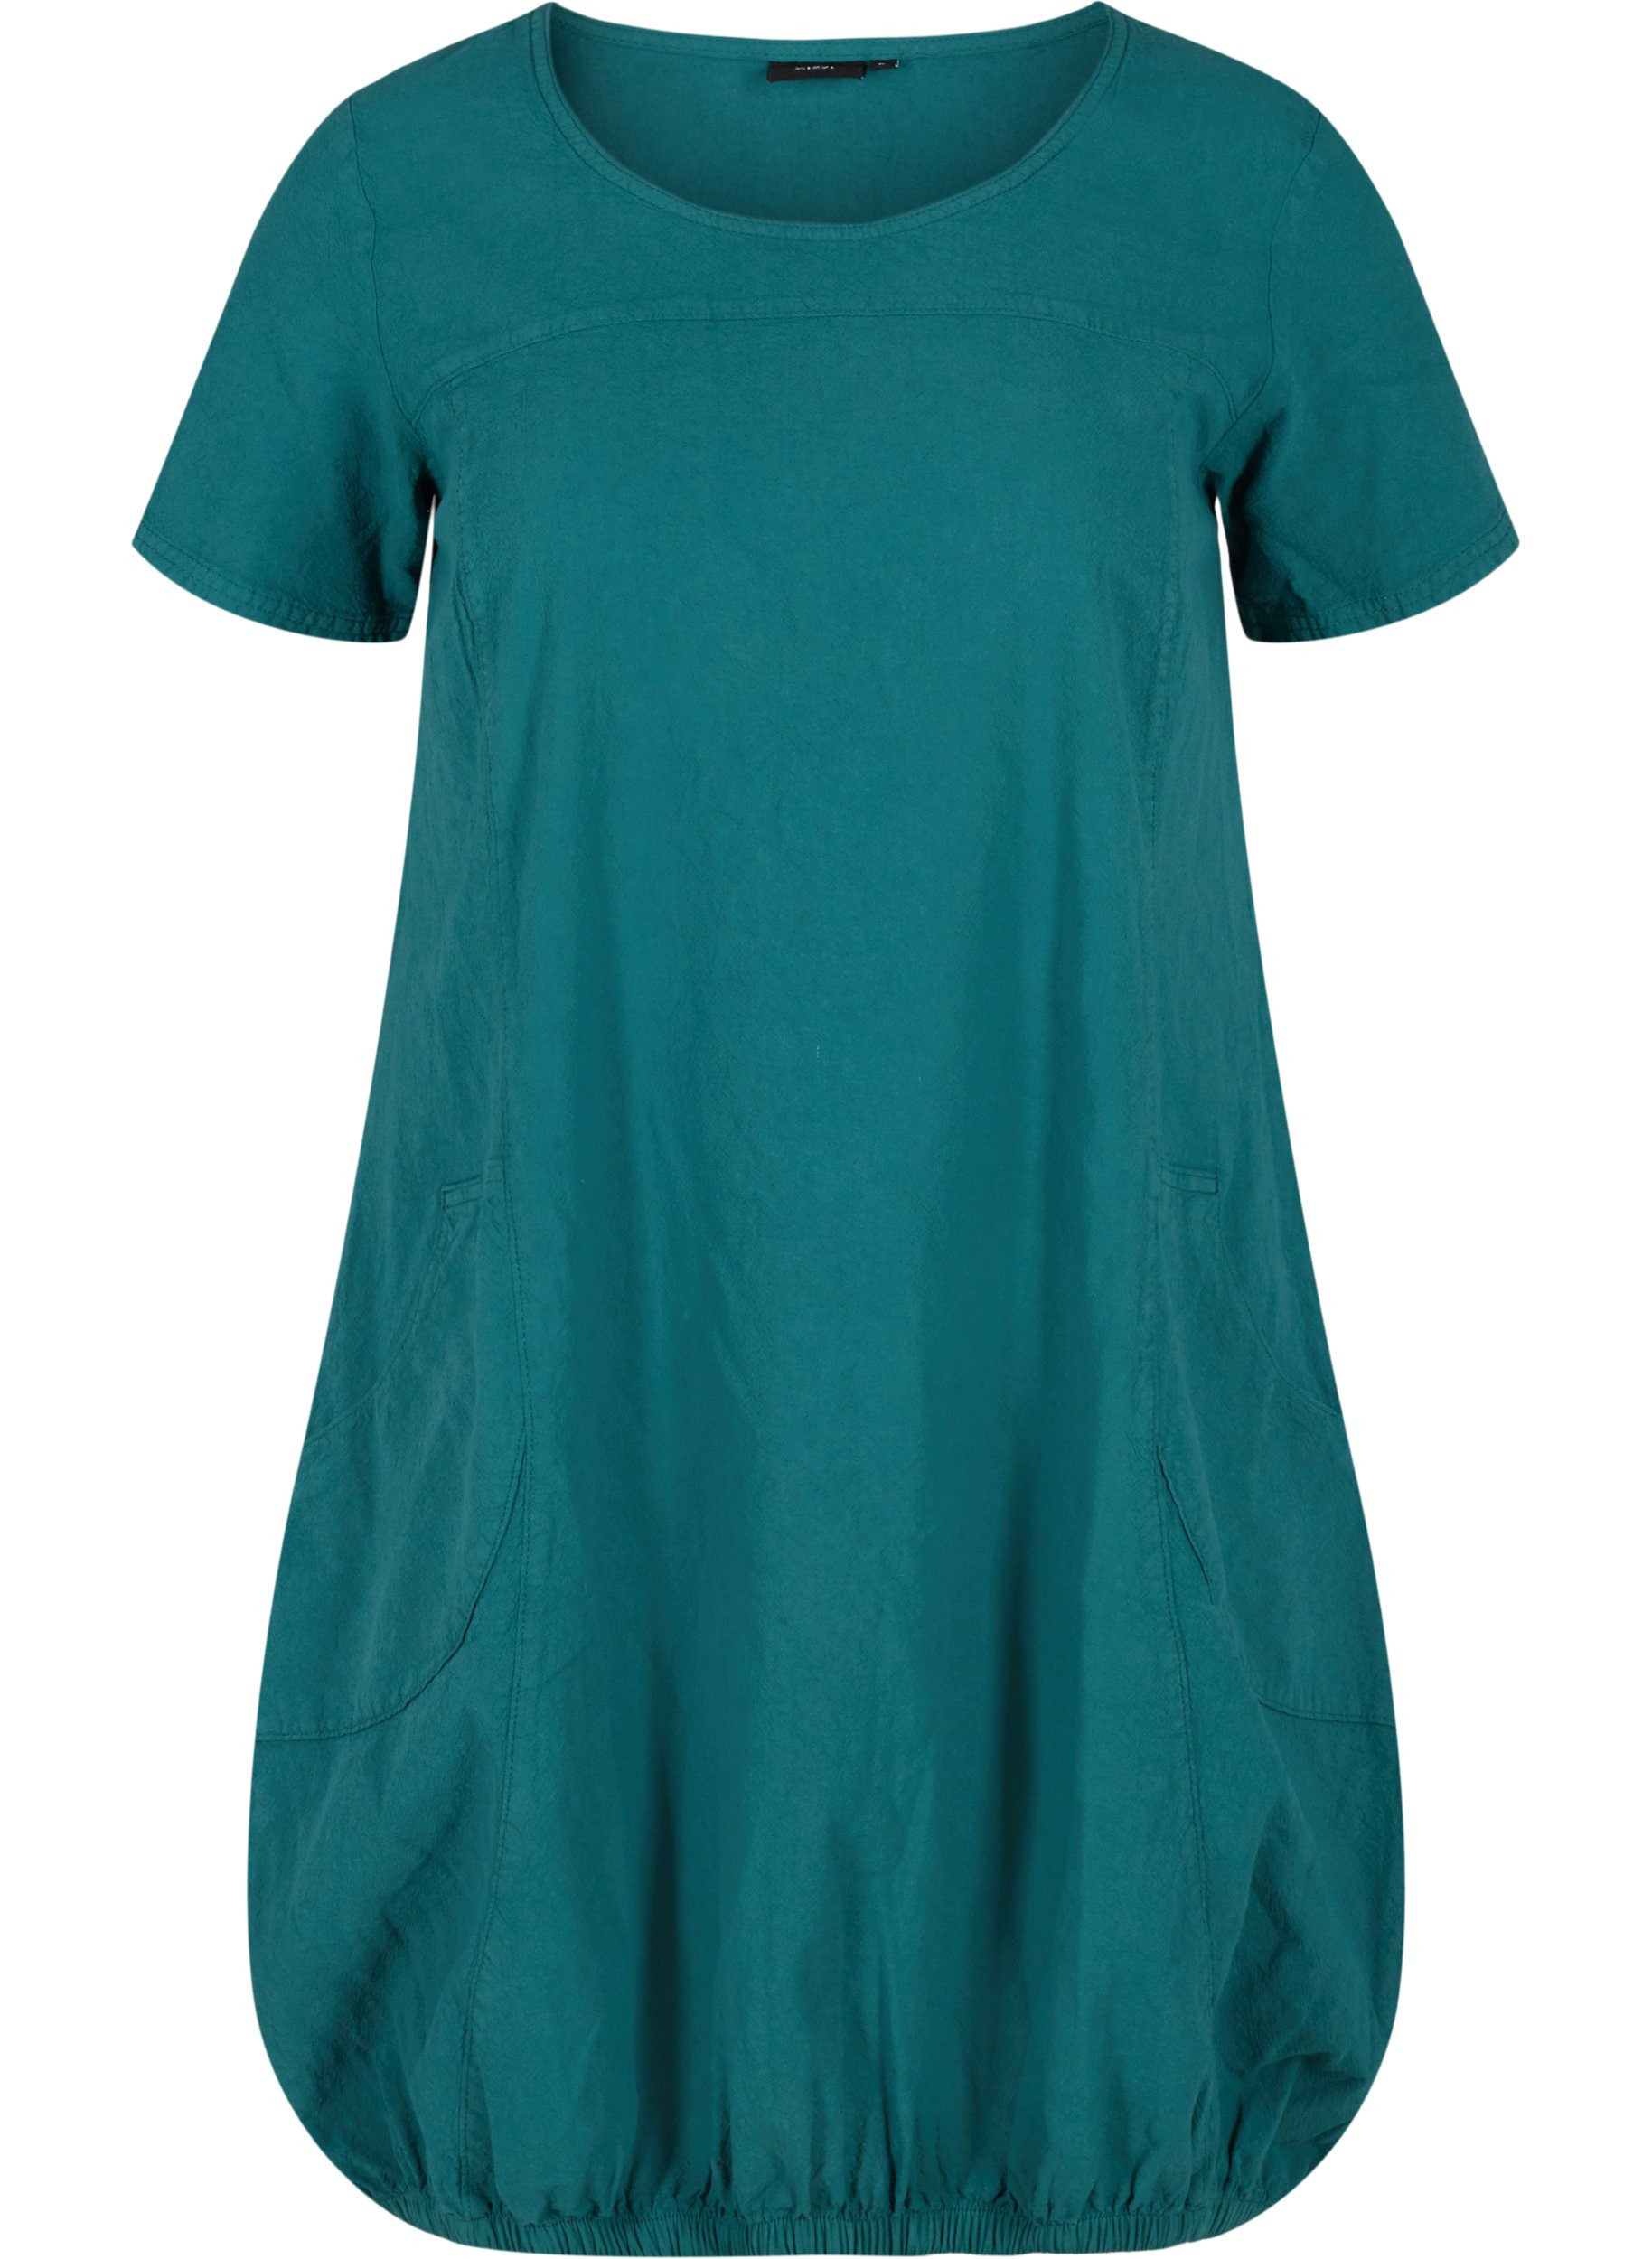 Short-sleeved cotton dress, Pacific